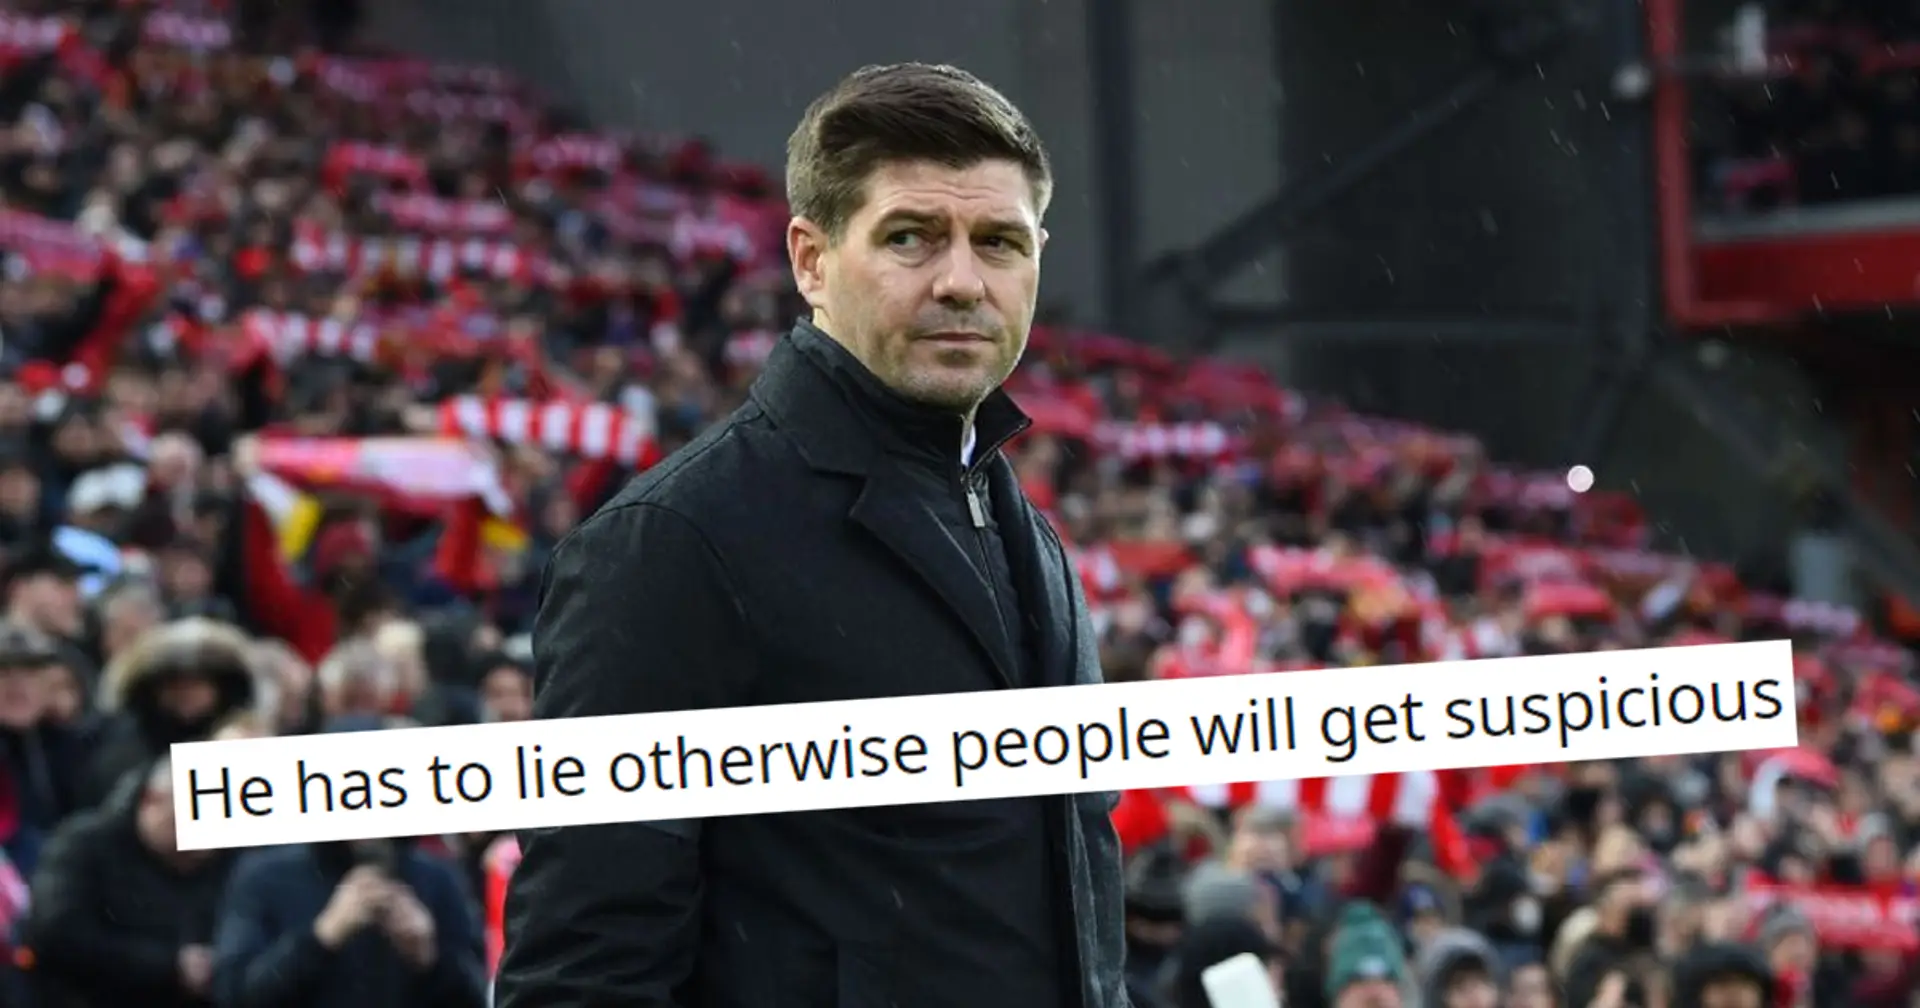 'Didn't take long to start moaning', 'pretend you didn't say that': LFC fans react as Gerrard complains about penalty